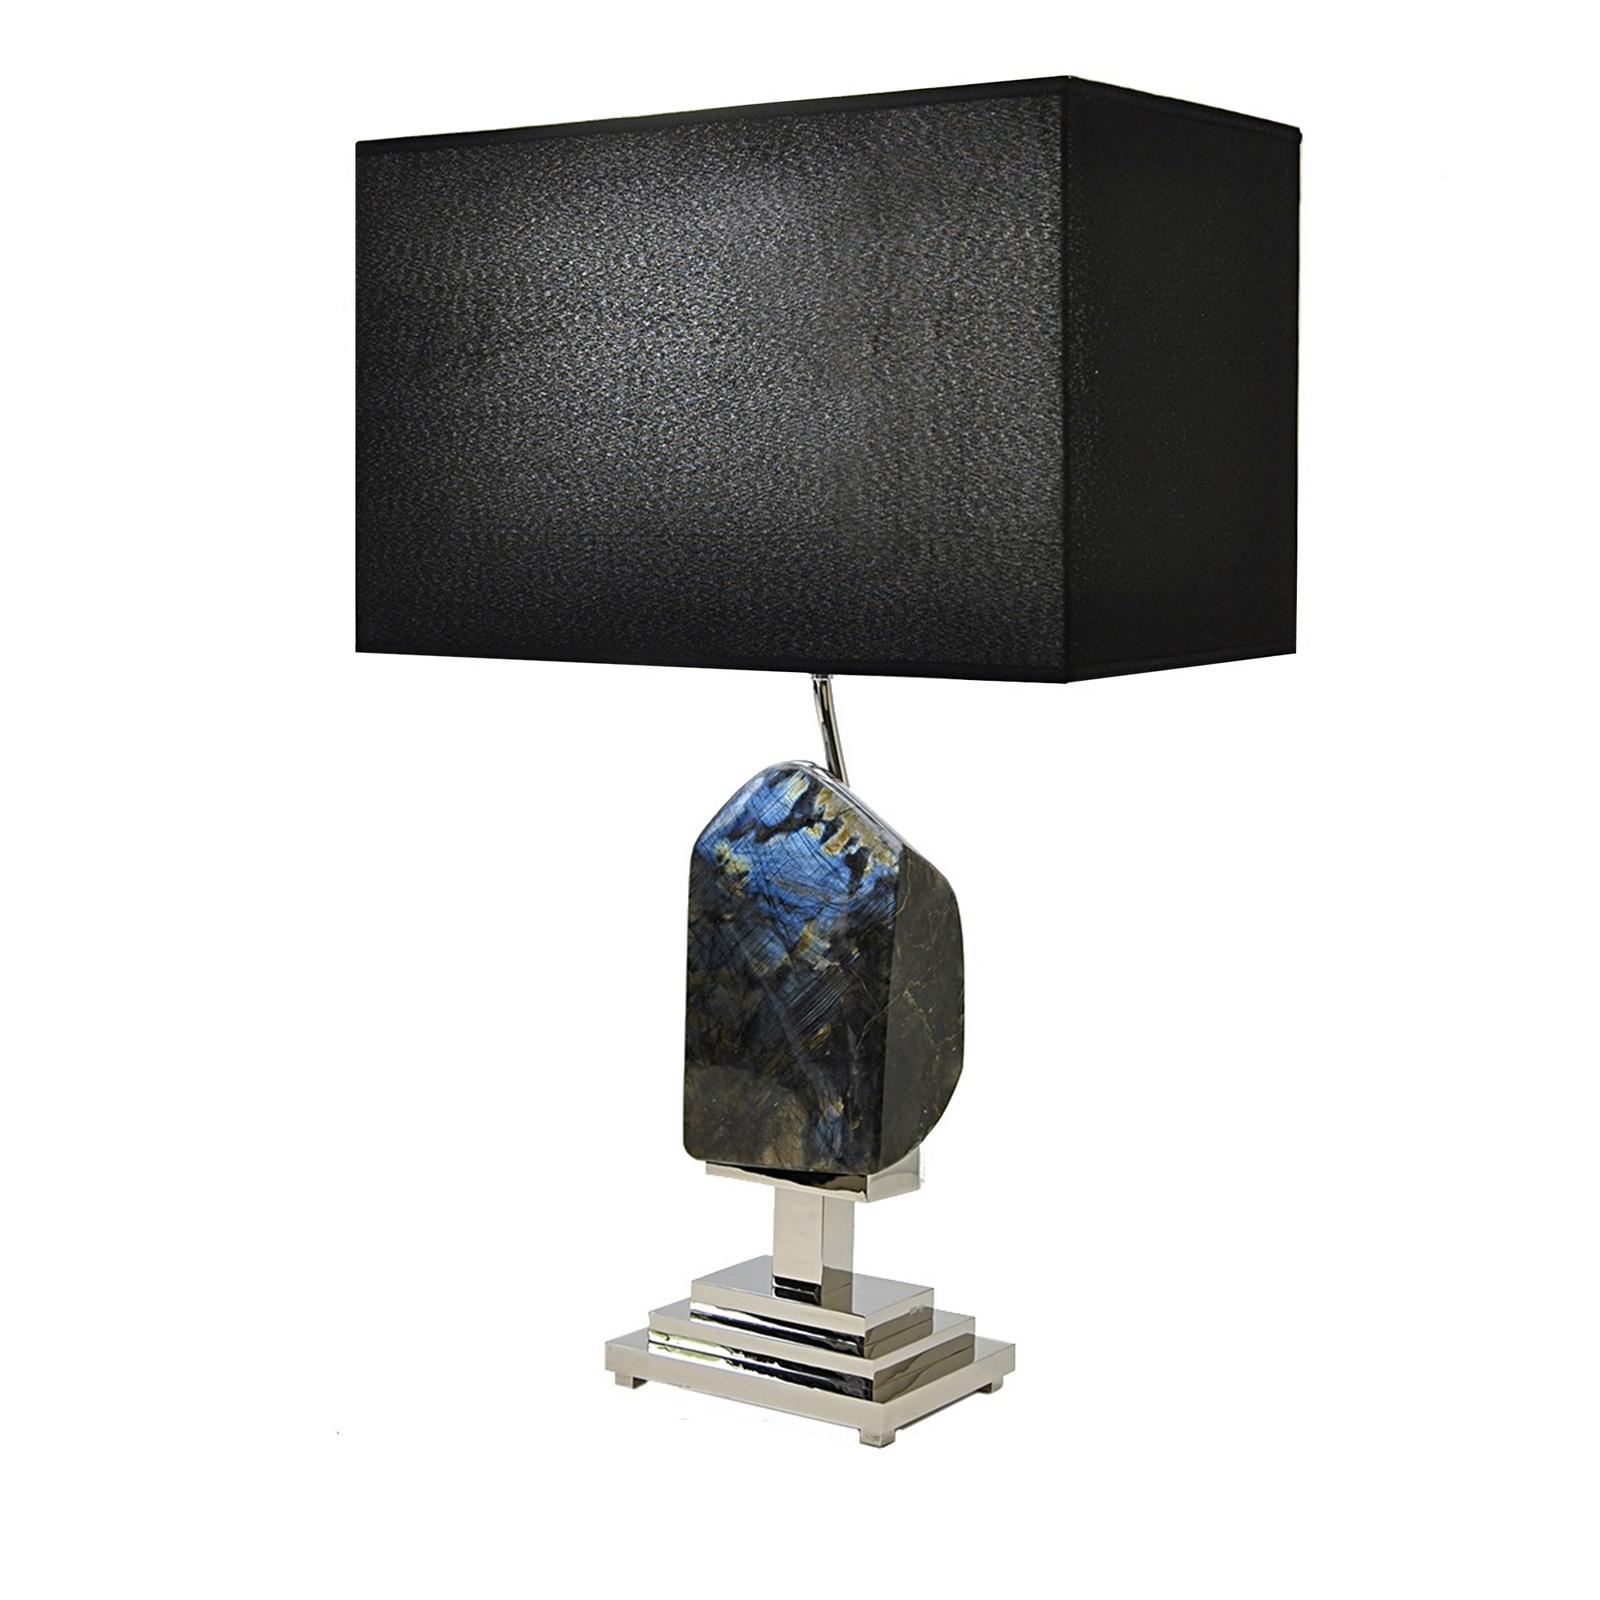 This elegant lamp will make a powerful statement in any room it is placed. A large irregularly-cut piece of labradorite is what constitutes the body of this lamp and is the first thing the eye is drawn to. This breathtaking stone from Madagascar is